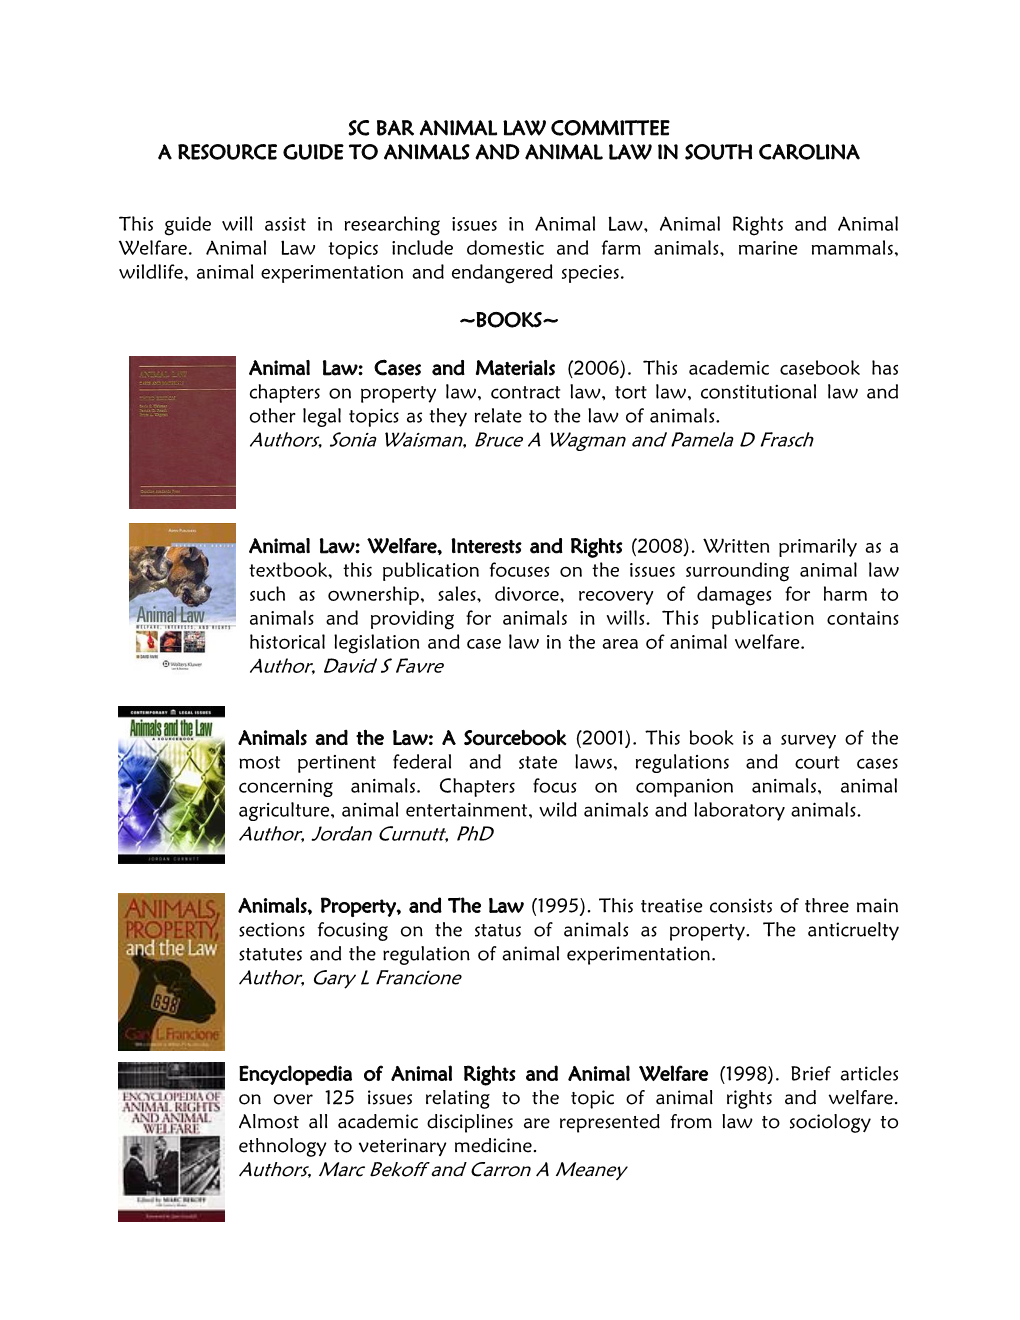 Animal Law Resources